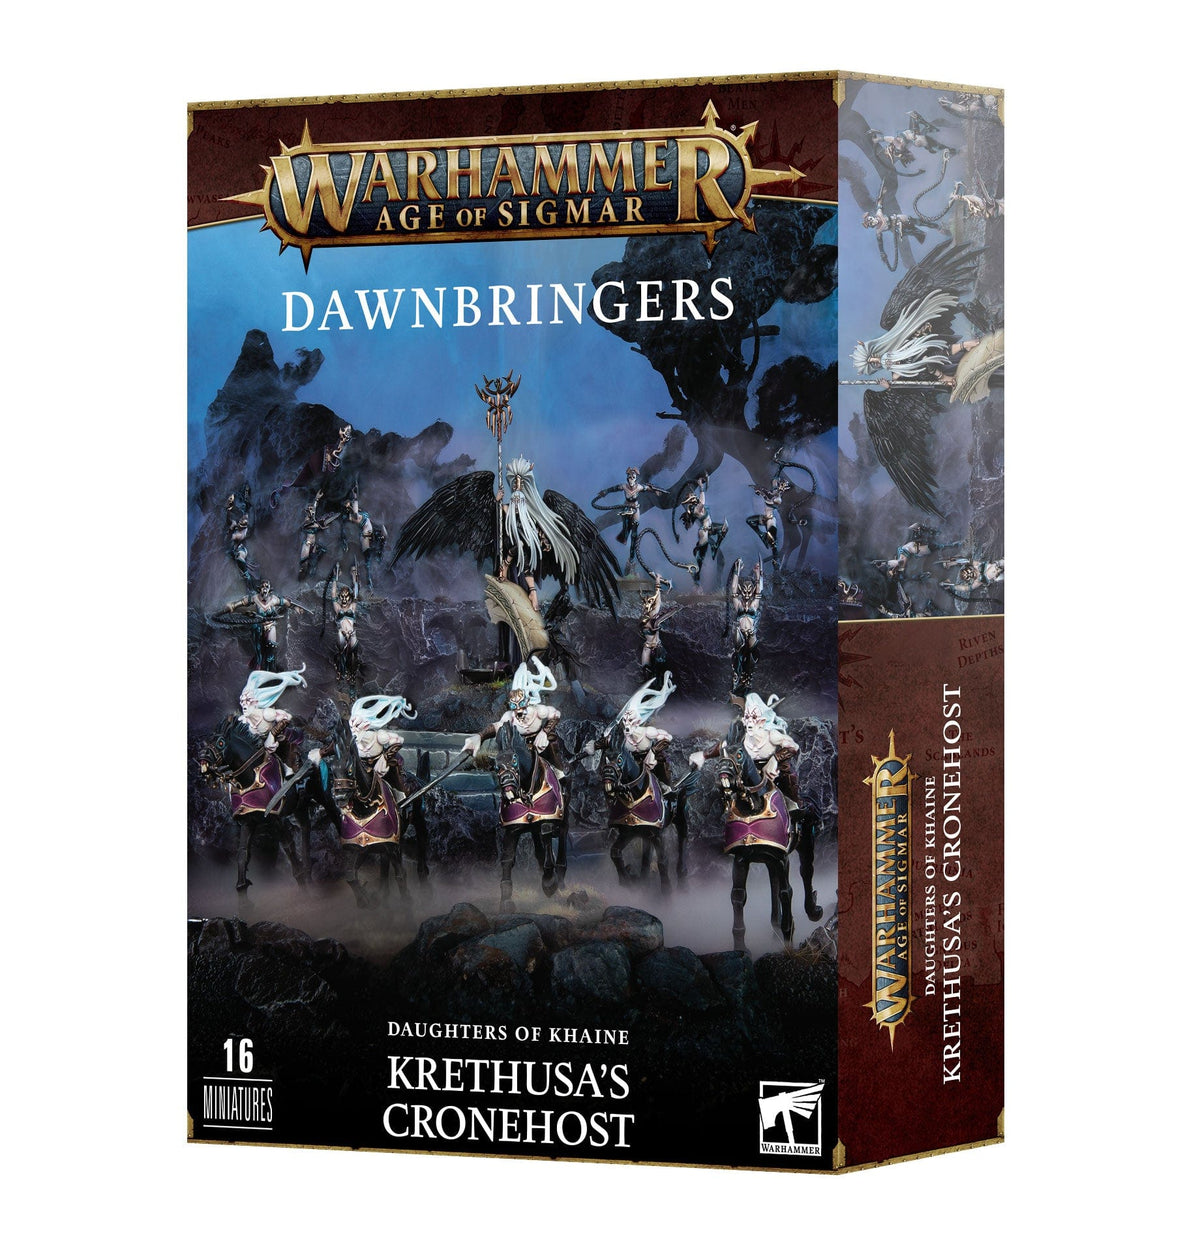 Warhammer: Age of Sigmar - Daughters of Khaine: Krethusa’s Cronehost